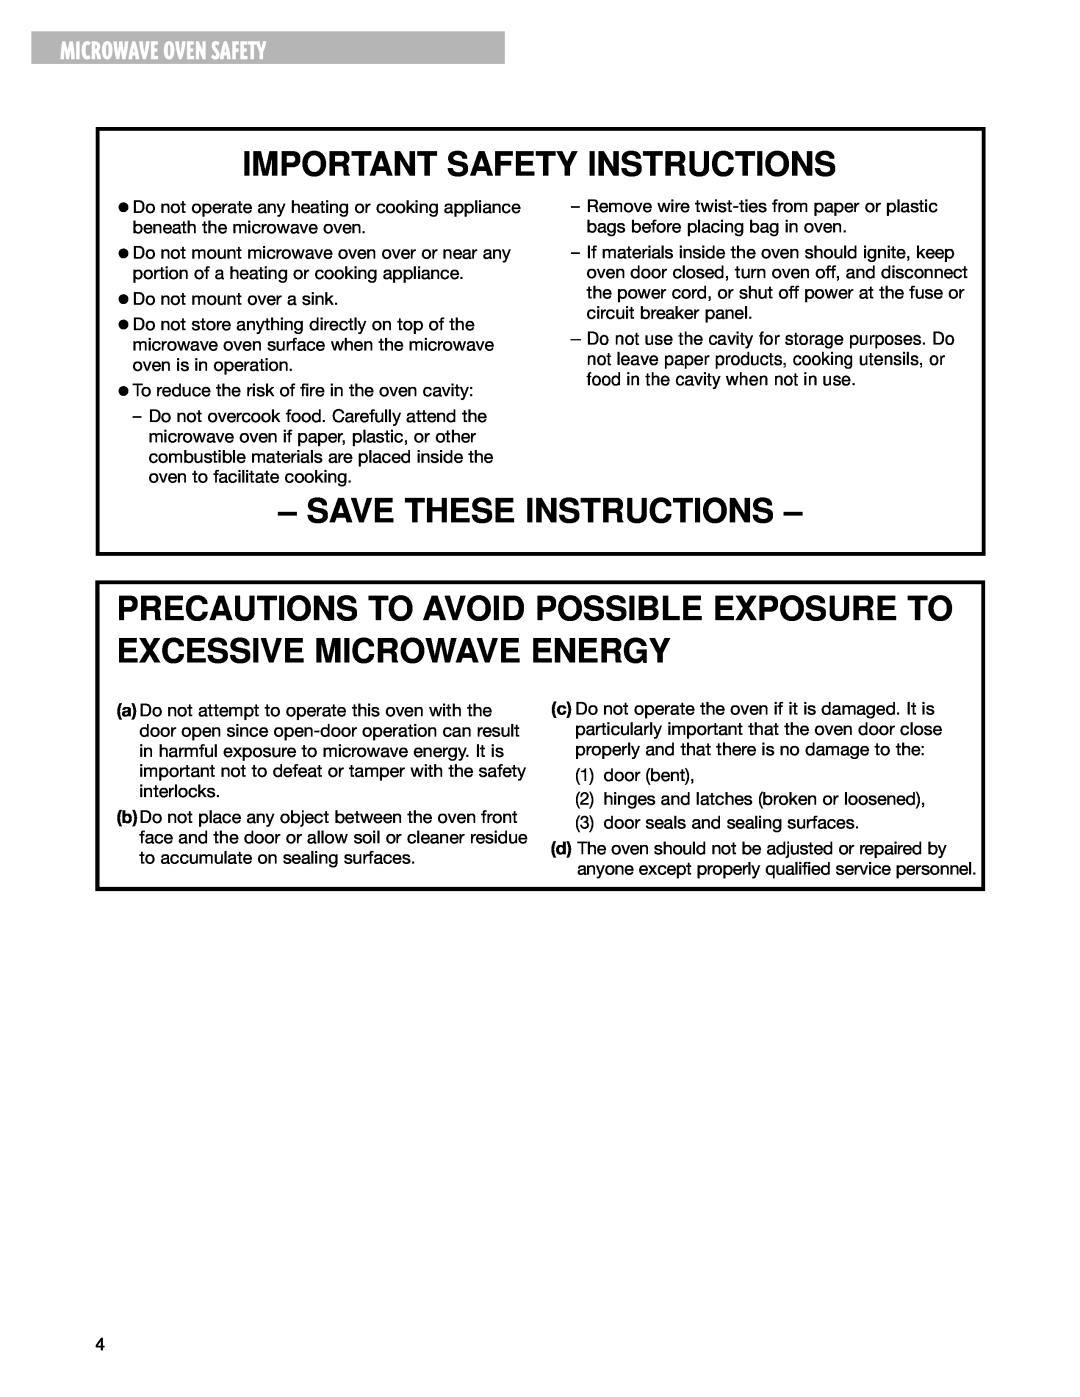 Whirlpool MT1078SG, MT1071SG Important Safety Instructions, Save These Instructions, Microwave Oven Safety 